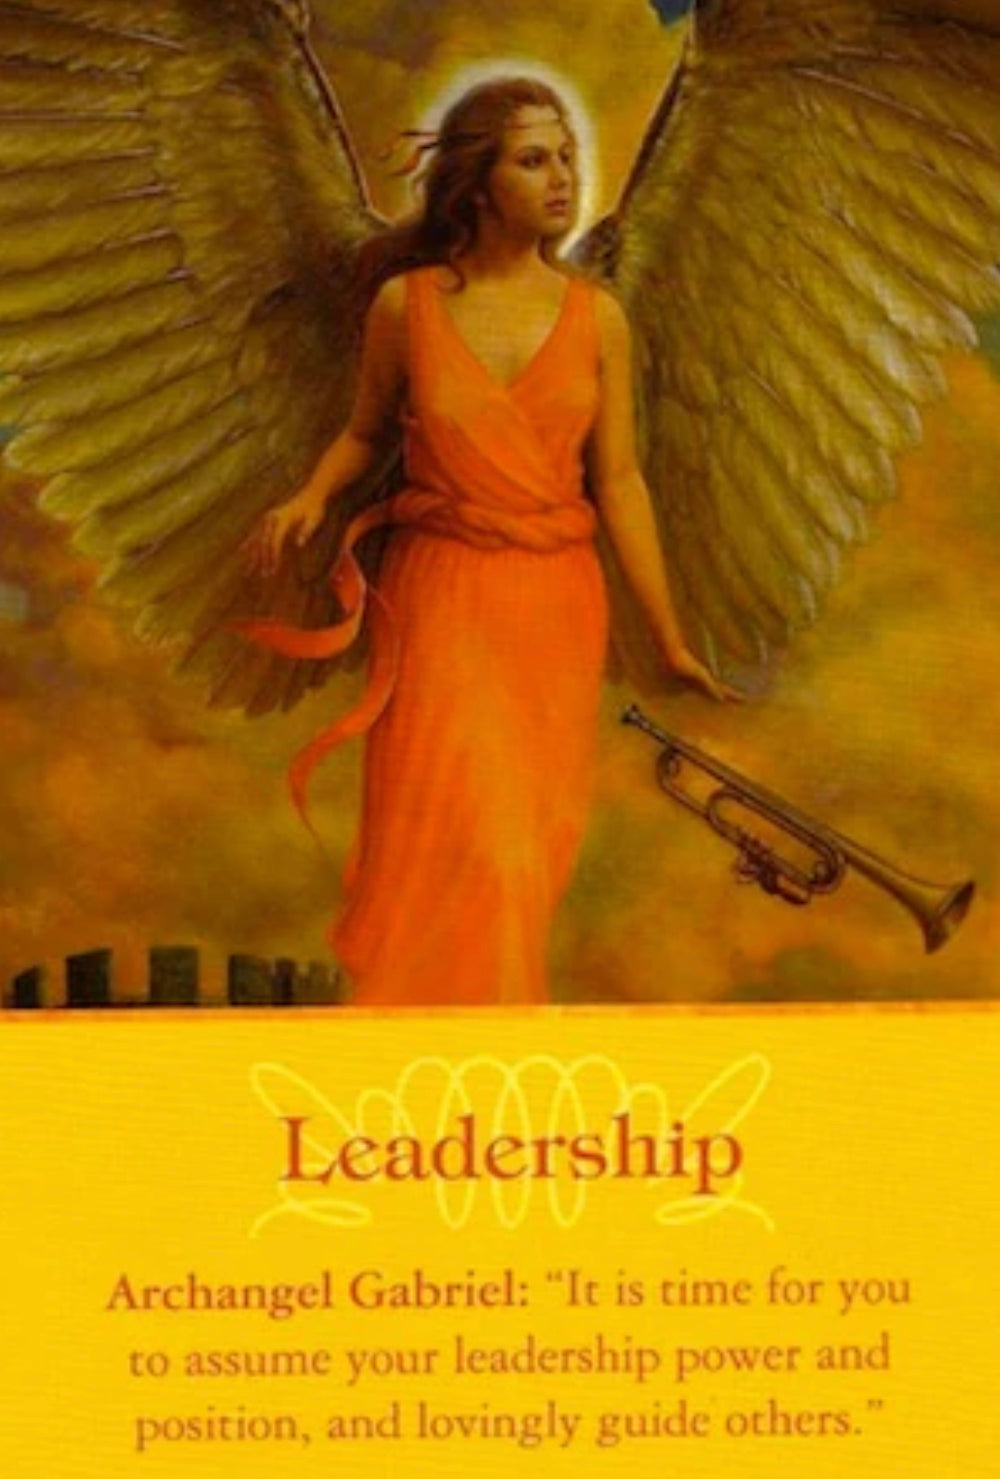 Message from Archangel Gabriel:  It’s time for you to assume your leadership power and position, and lovingly guide others.